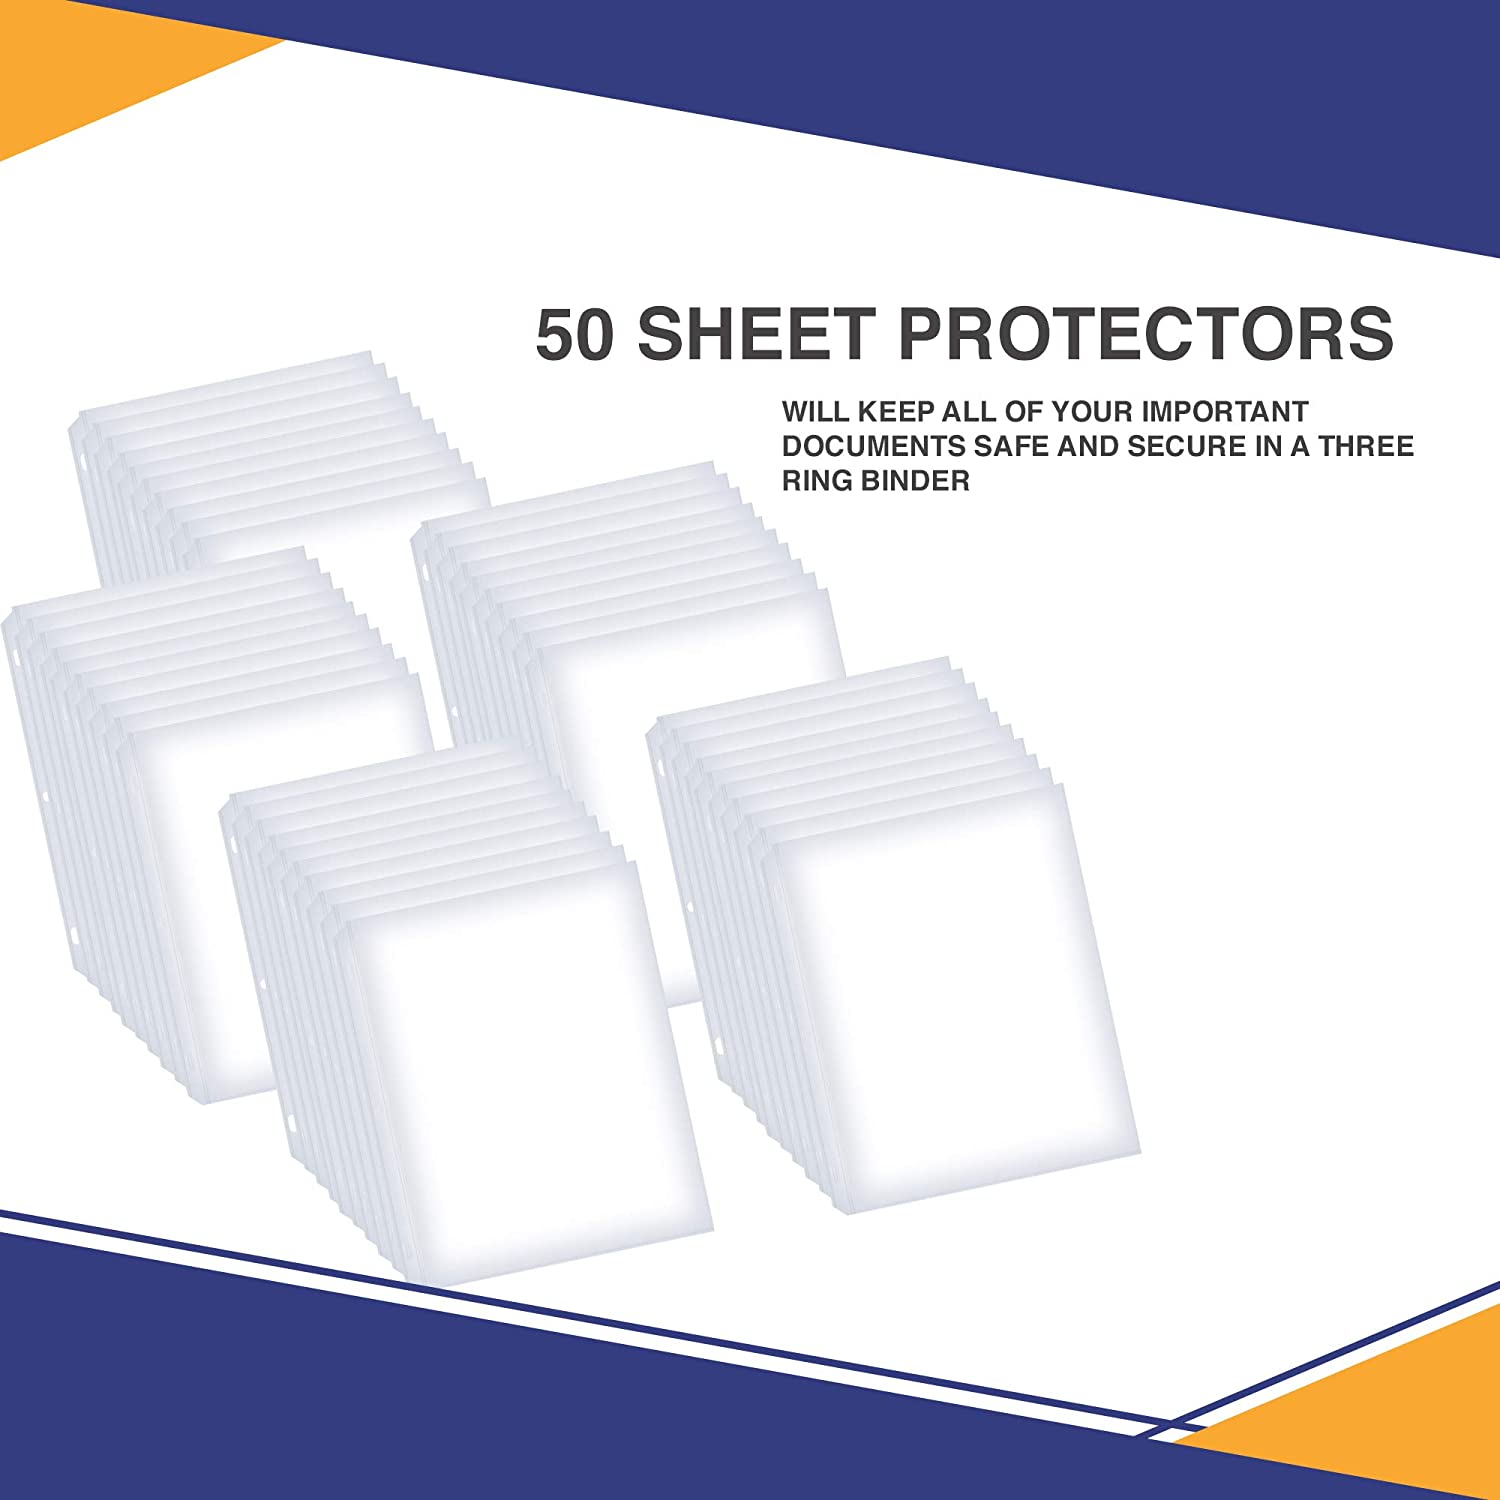 Performore 50 Sheet Protectors, Durable Clear Page Protectors 8.5 x 11 inch for 3 Ring Binder, Plastic Sheet Sleeves, Durable Top Loading Paper